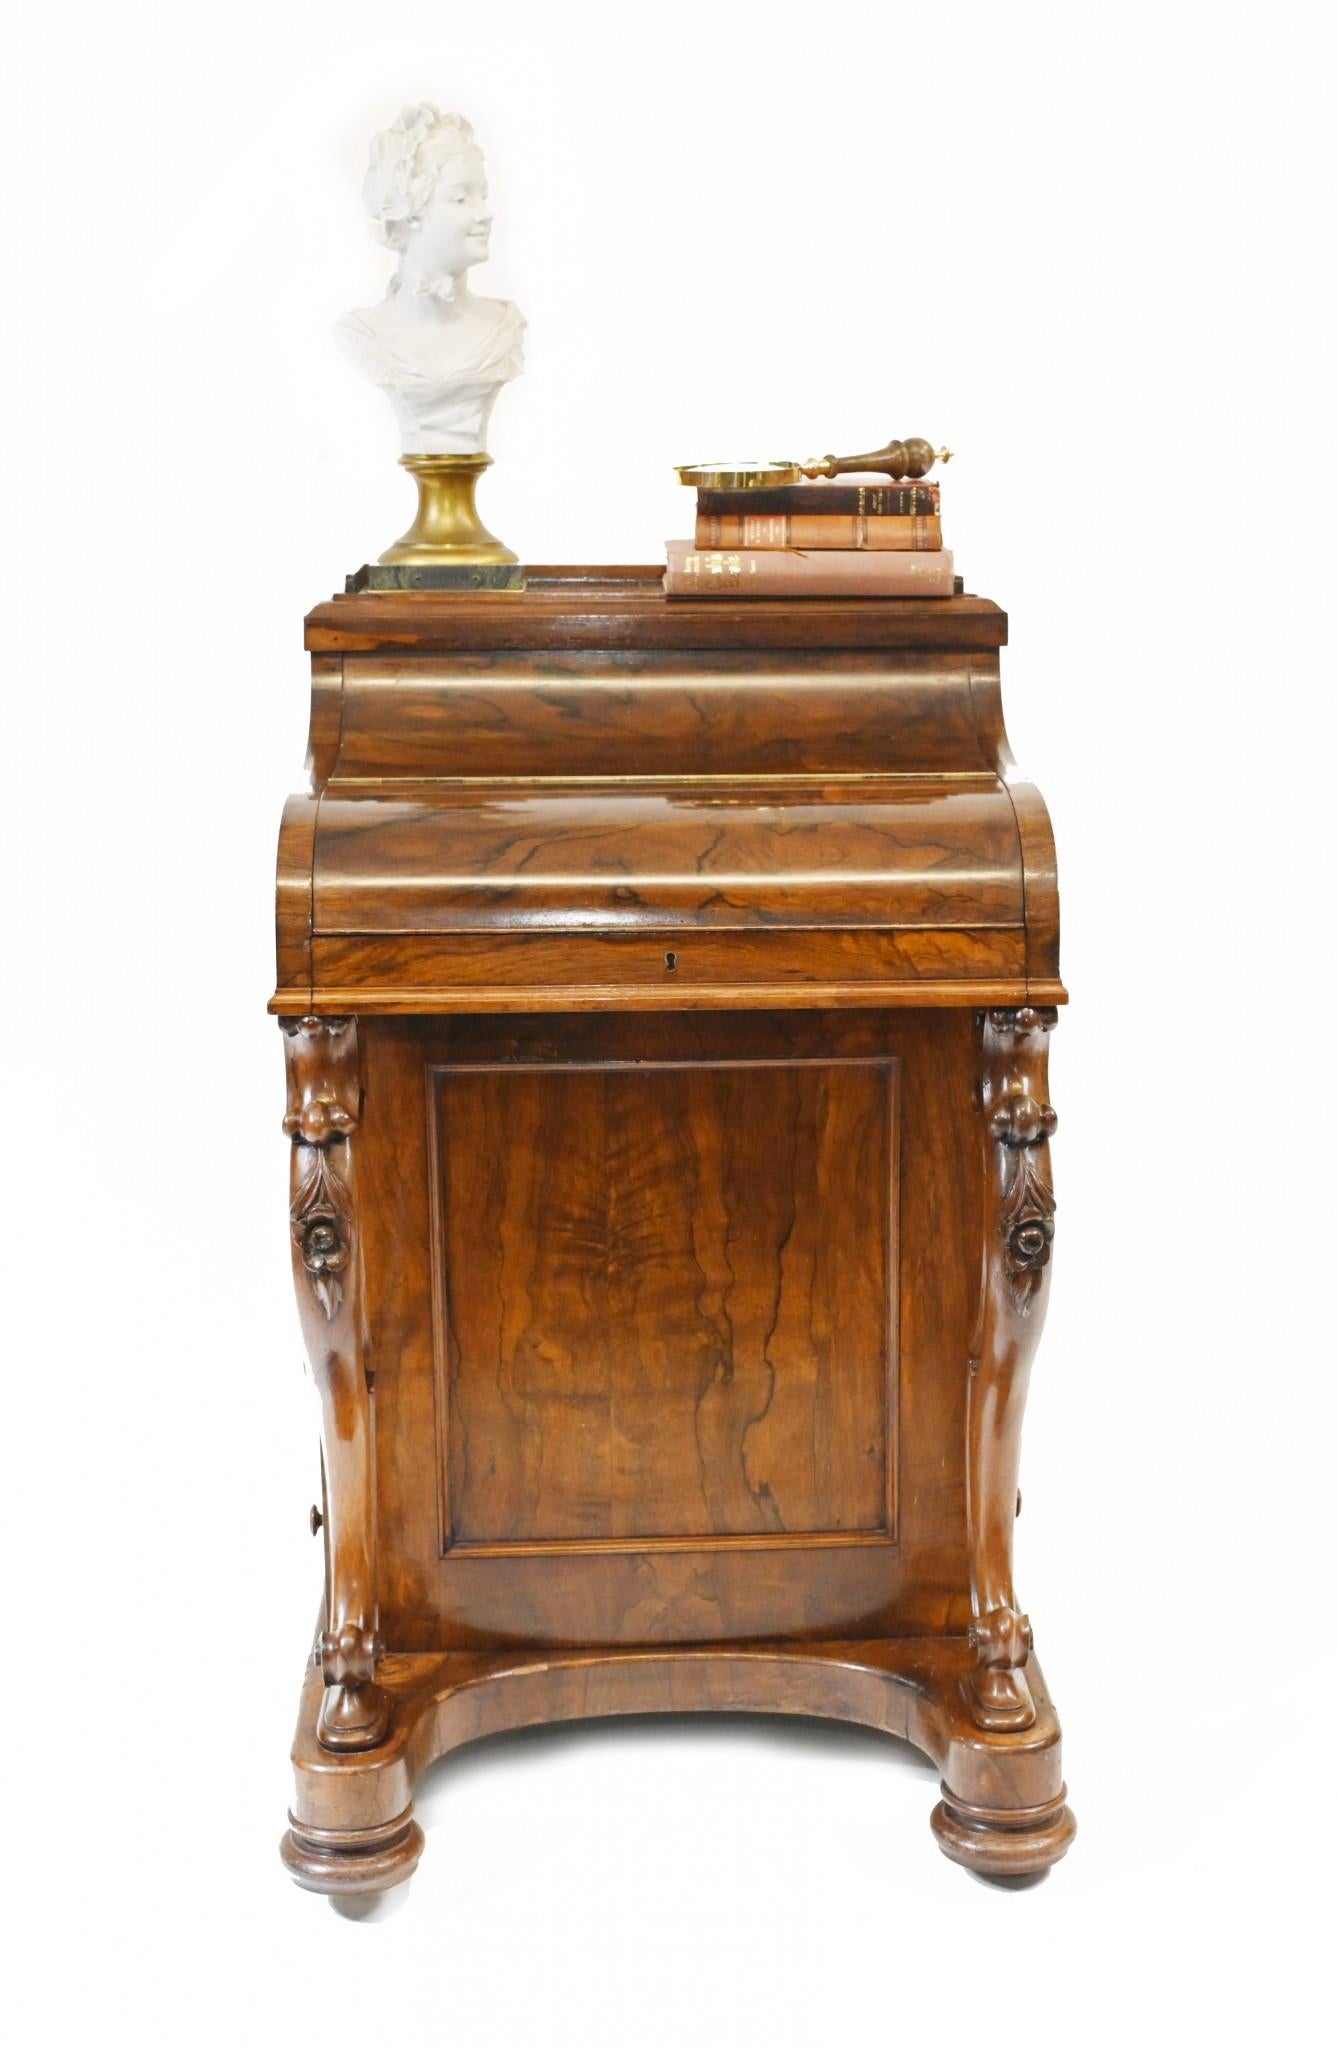 Elegant piano topped Victorian Davenport in rosewood
Features the all important pop up mechanism 
Activated by button in drawer to make the drawers and cubby holes pop up
Great little desk we date to circa 1860
Some of our items are in storage